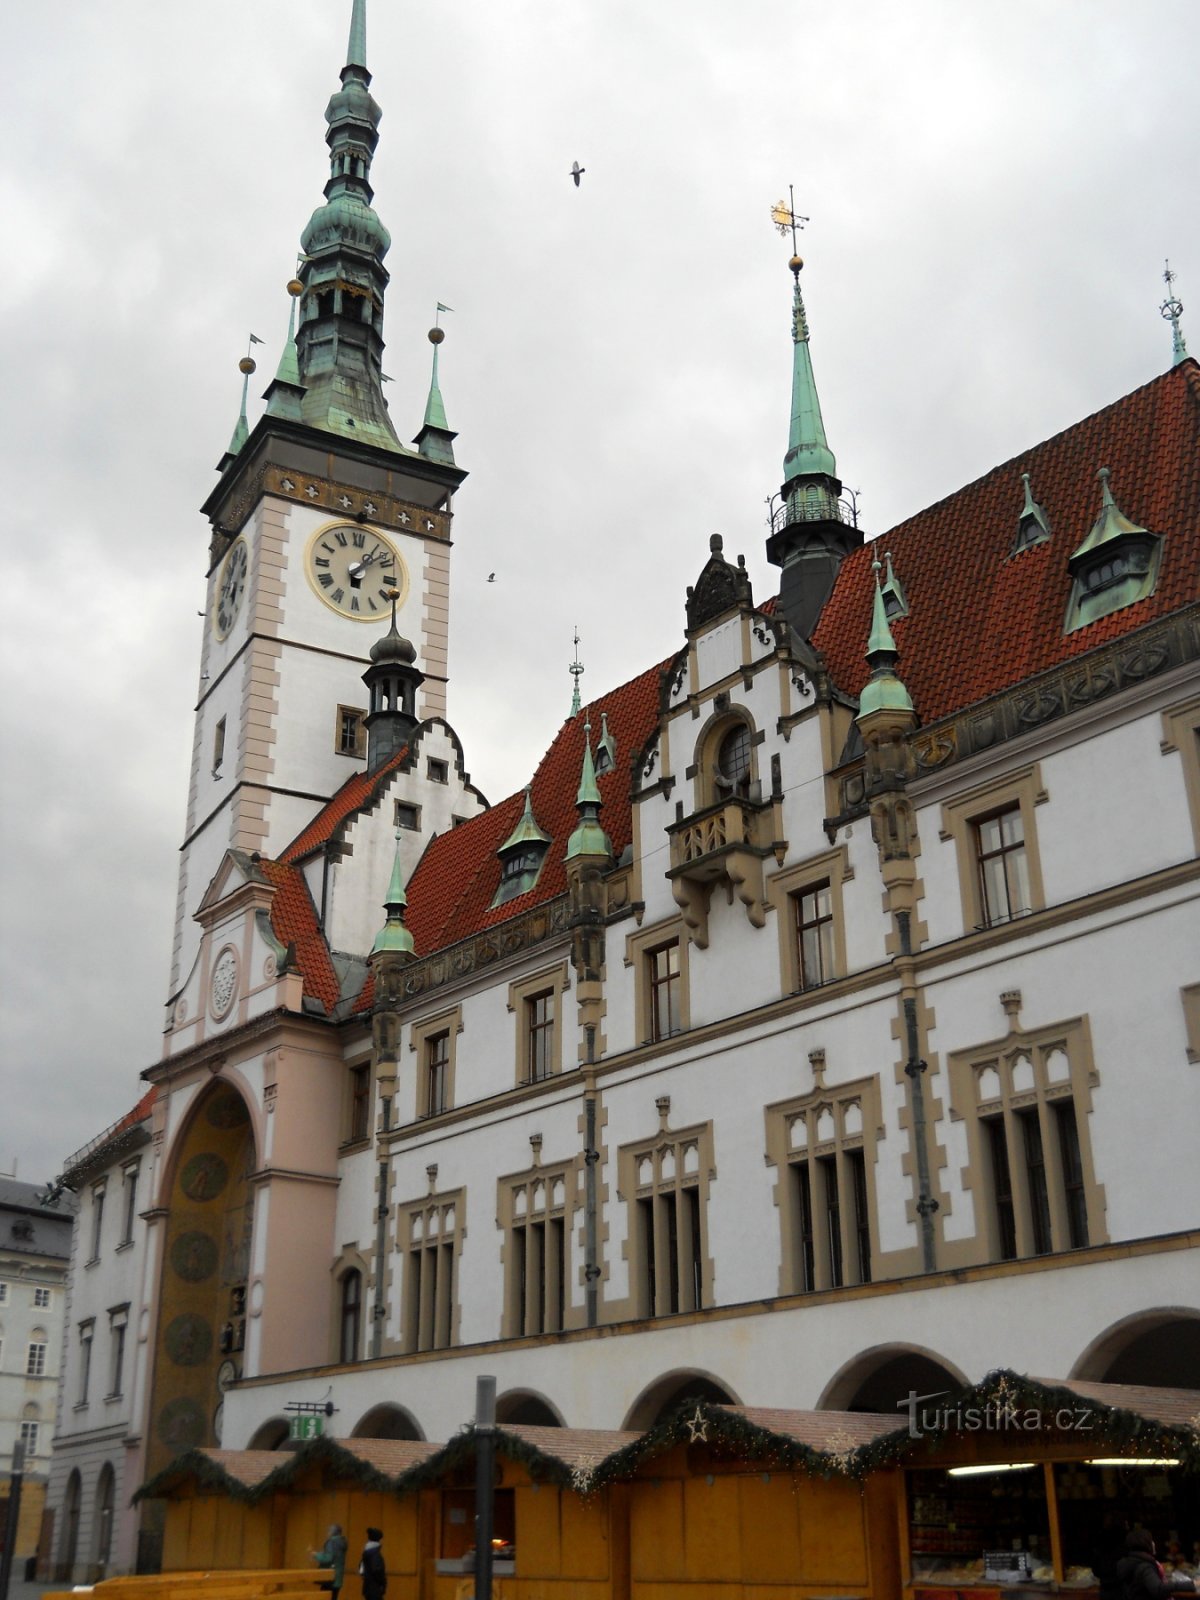 Upper Square - Town Hall in winter